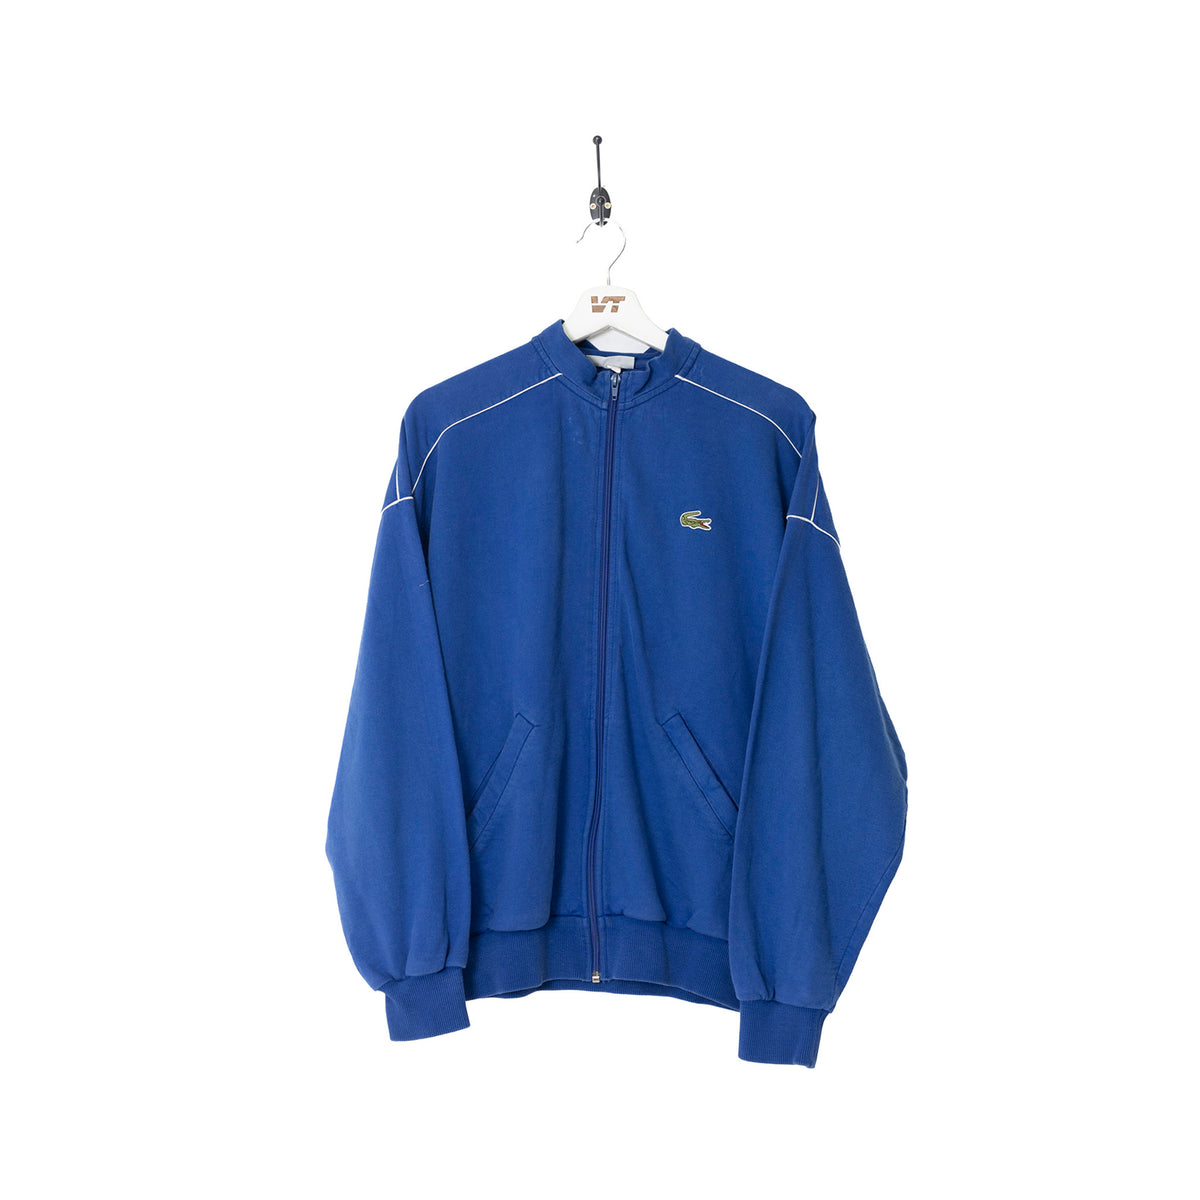 Lacoste Contrast Piping Zip Sweater – Vintage Threads